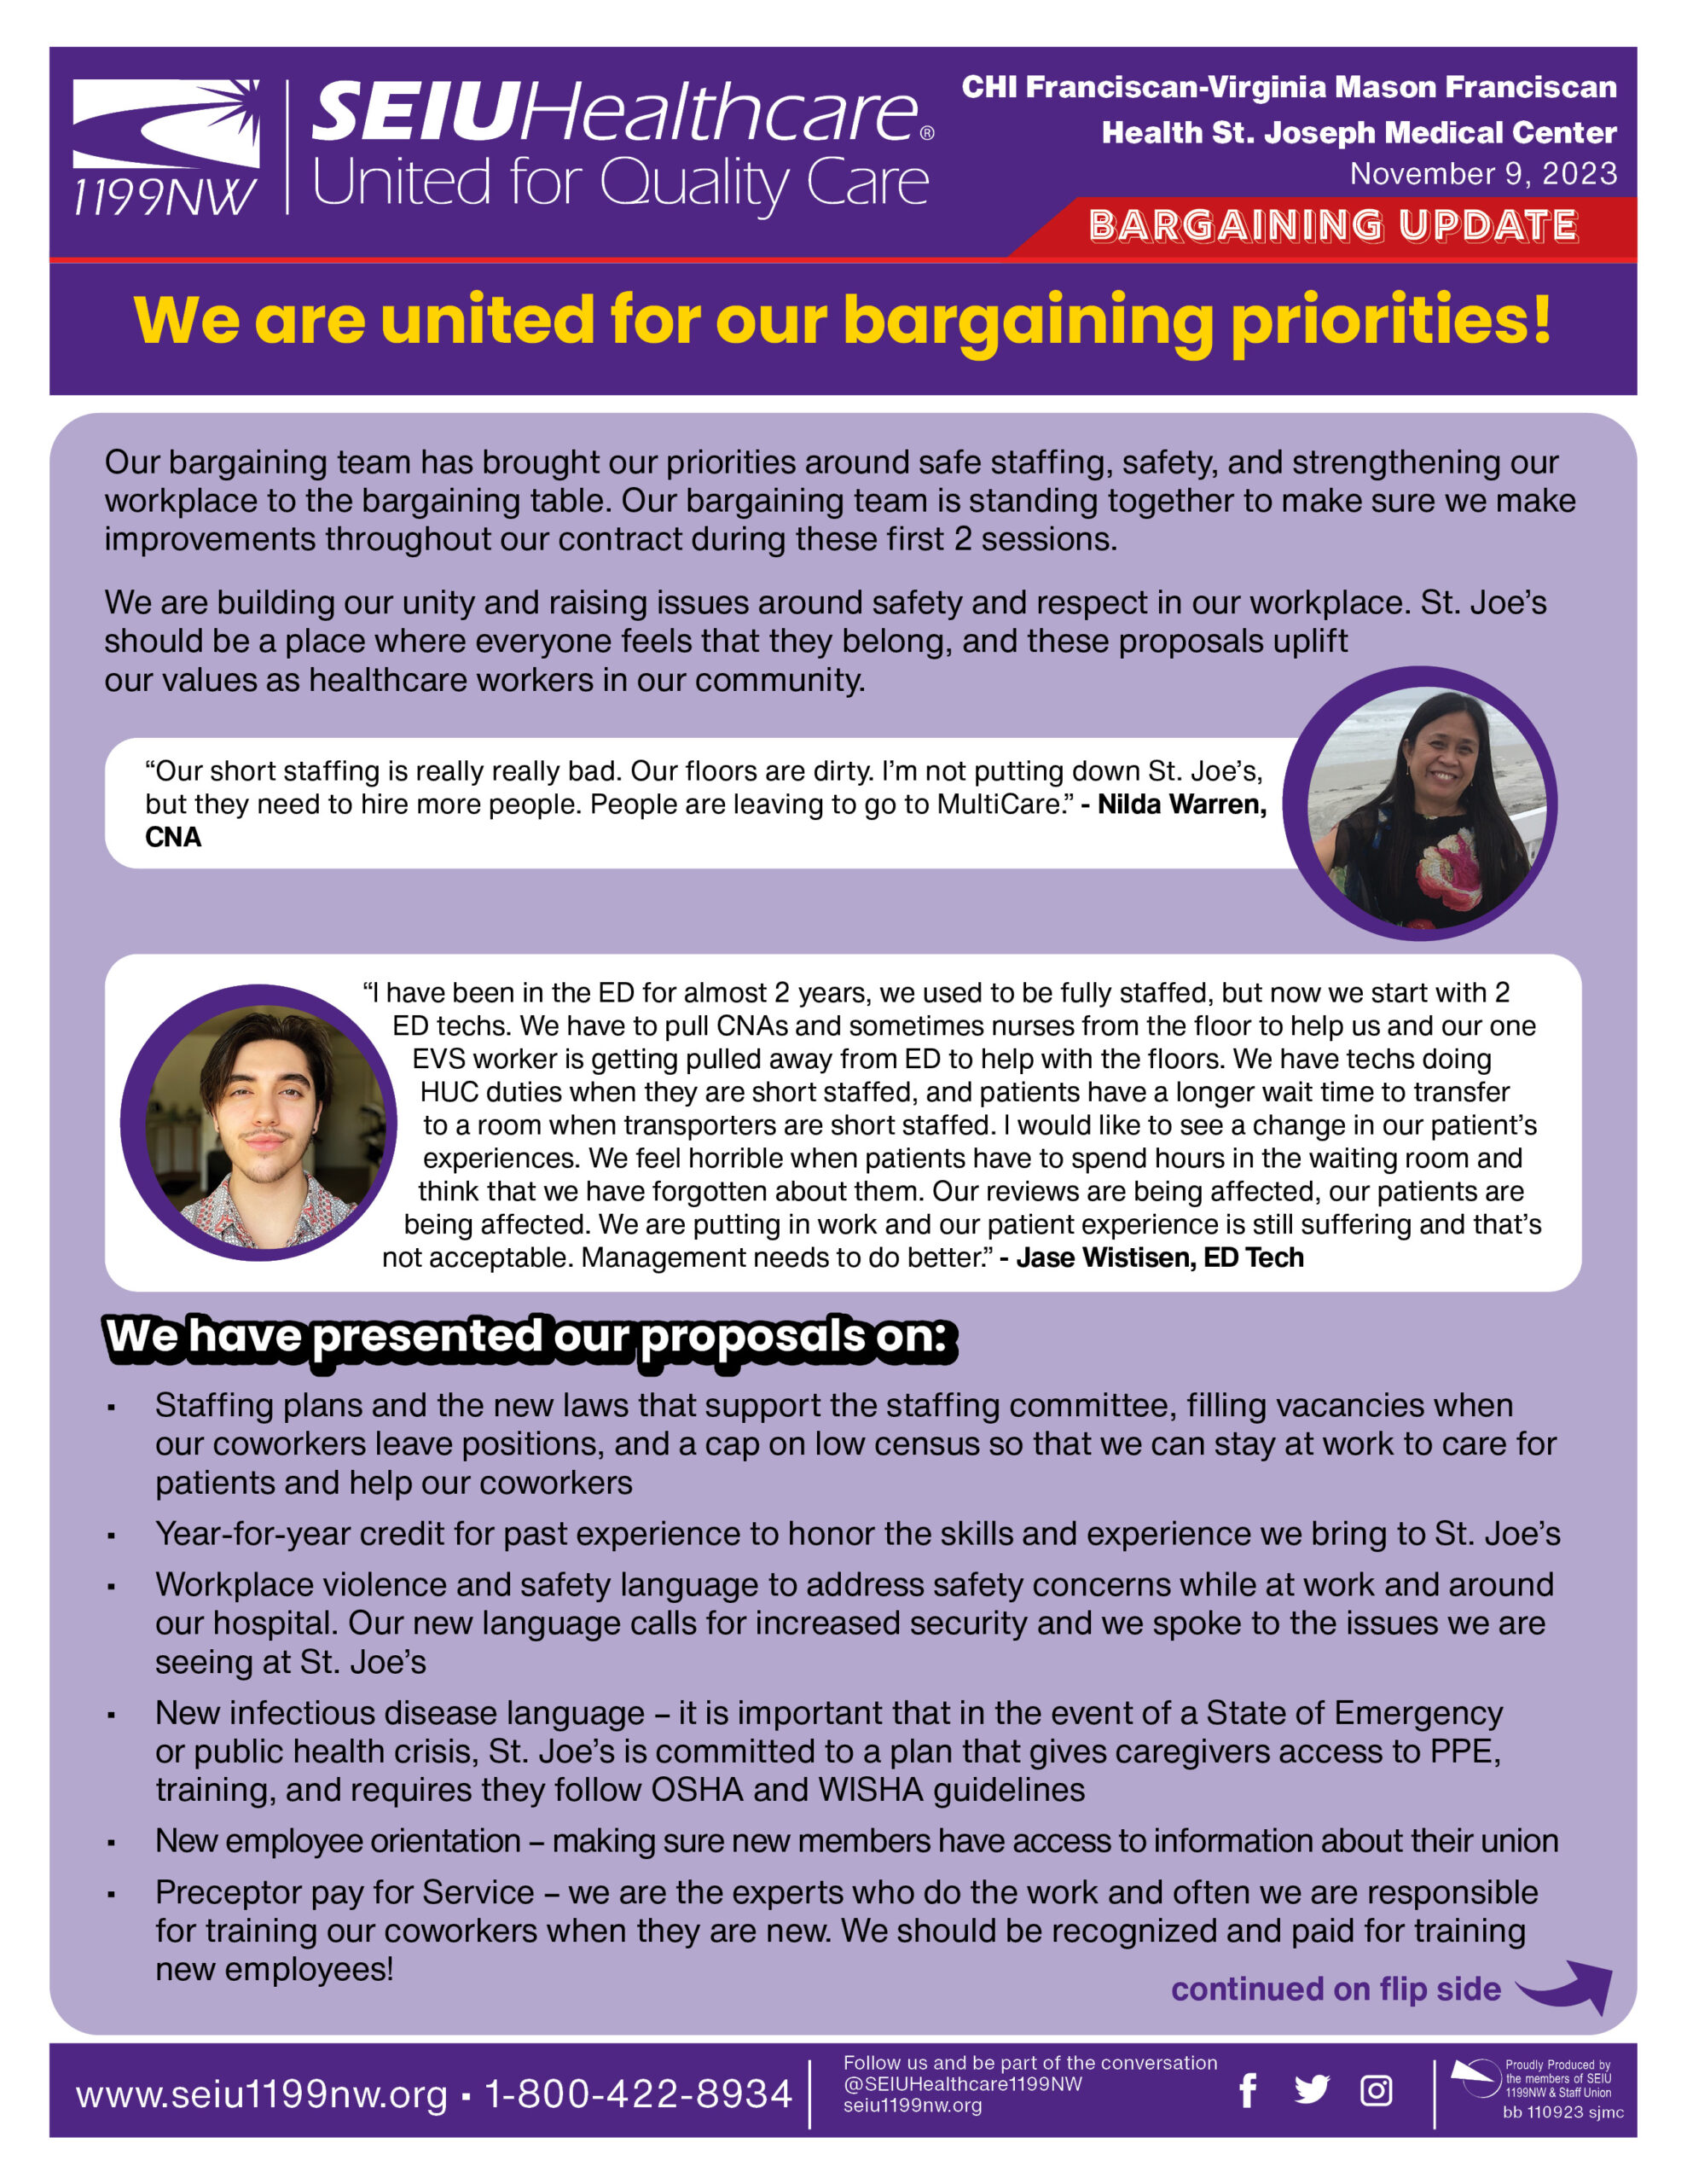 We are united for our bargaining priorities!